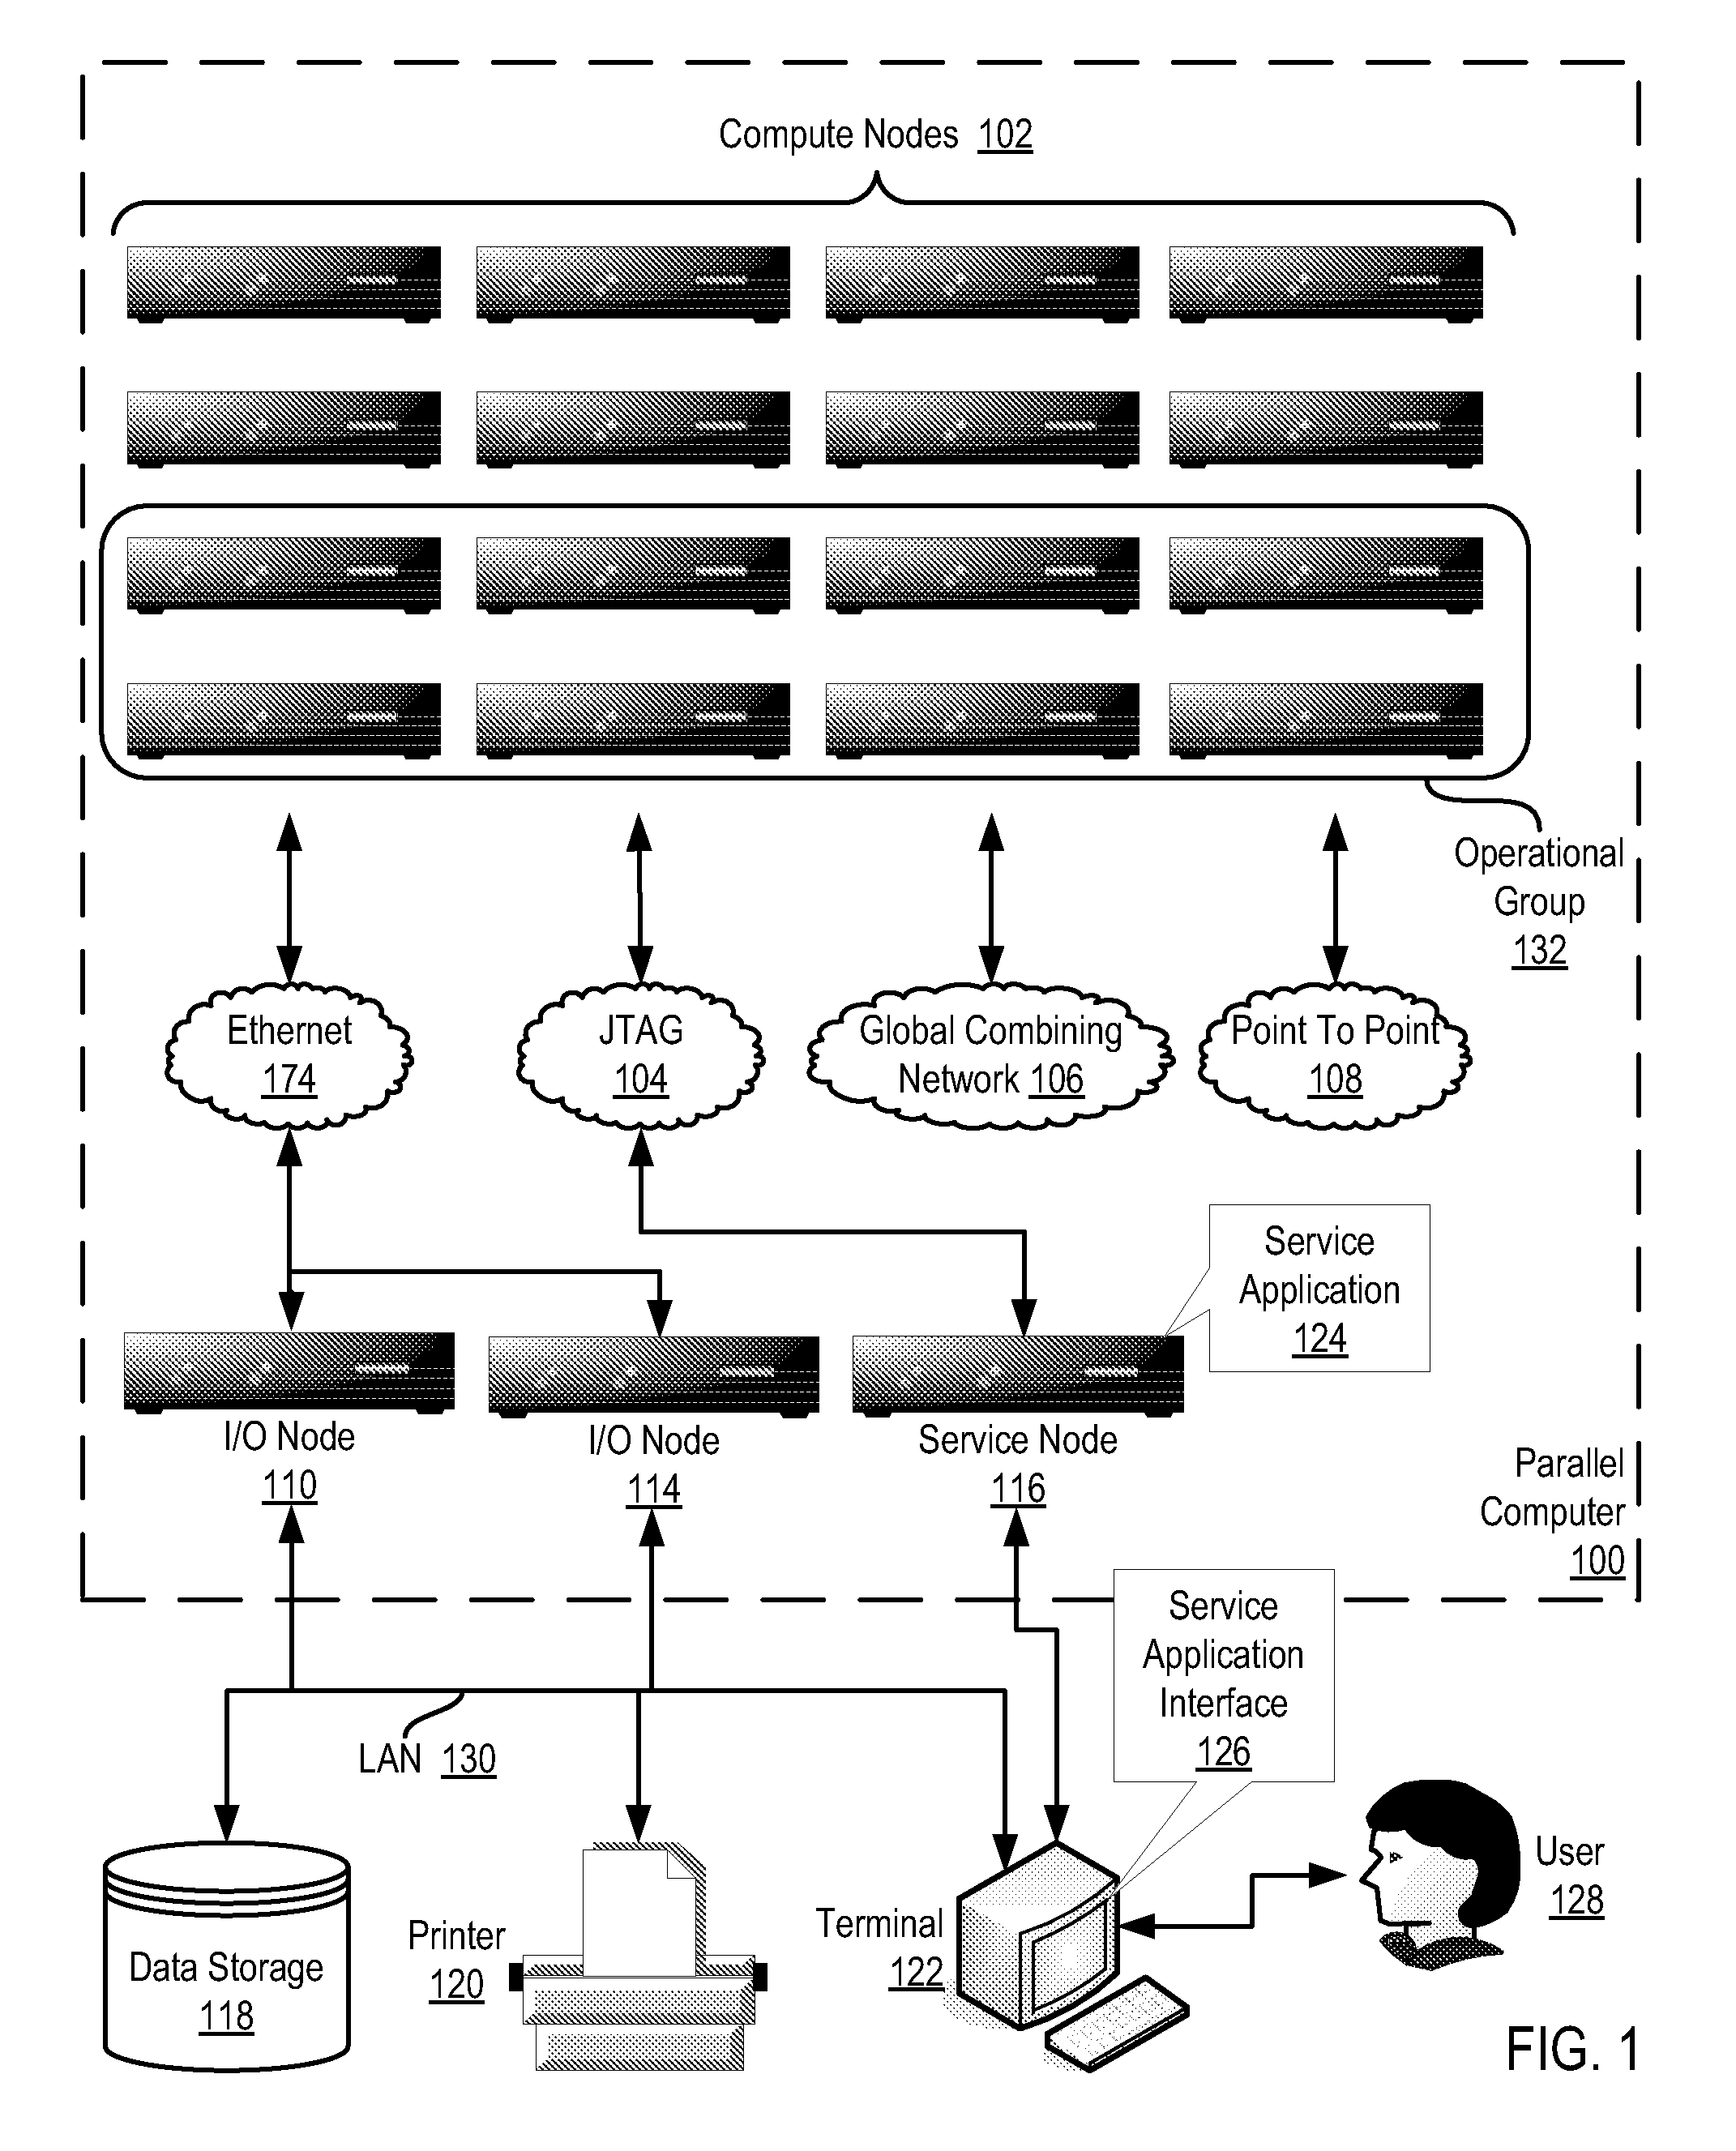 Self-pacing direct memory access data transfer operations for compute nodes in a parallel computer